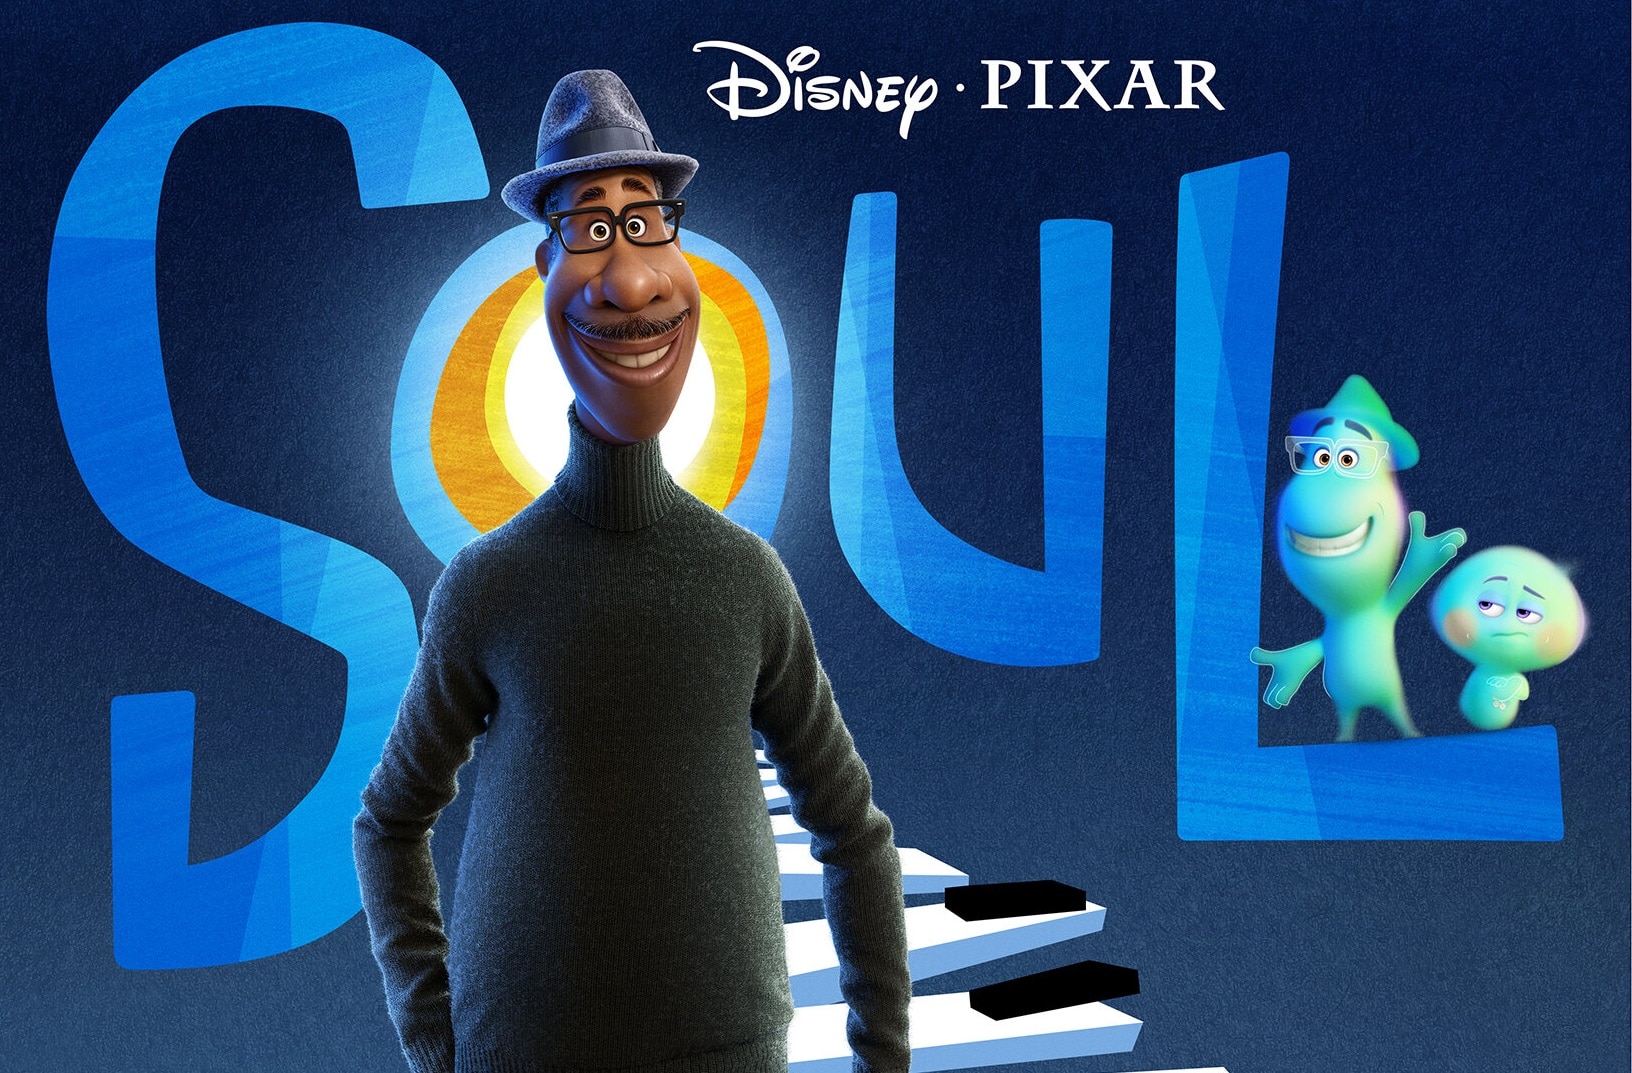 Pixar’s Dazzling New Trailer Will Lift Your Soul